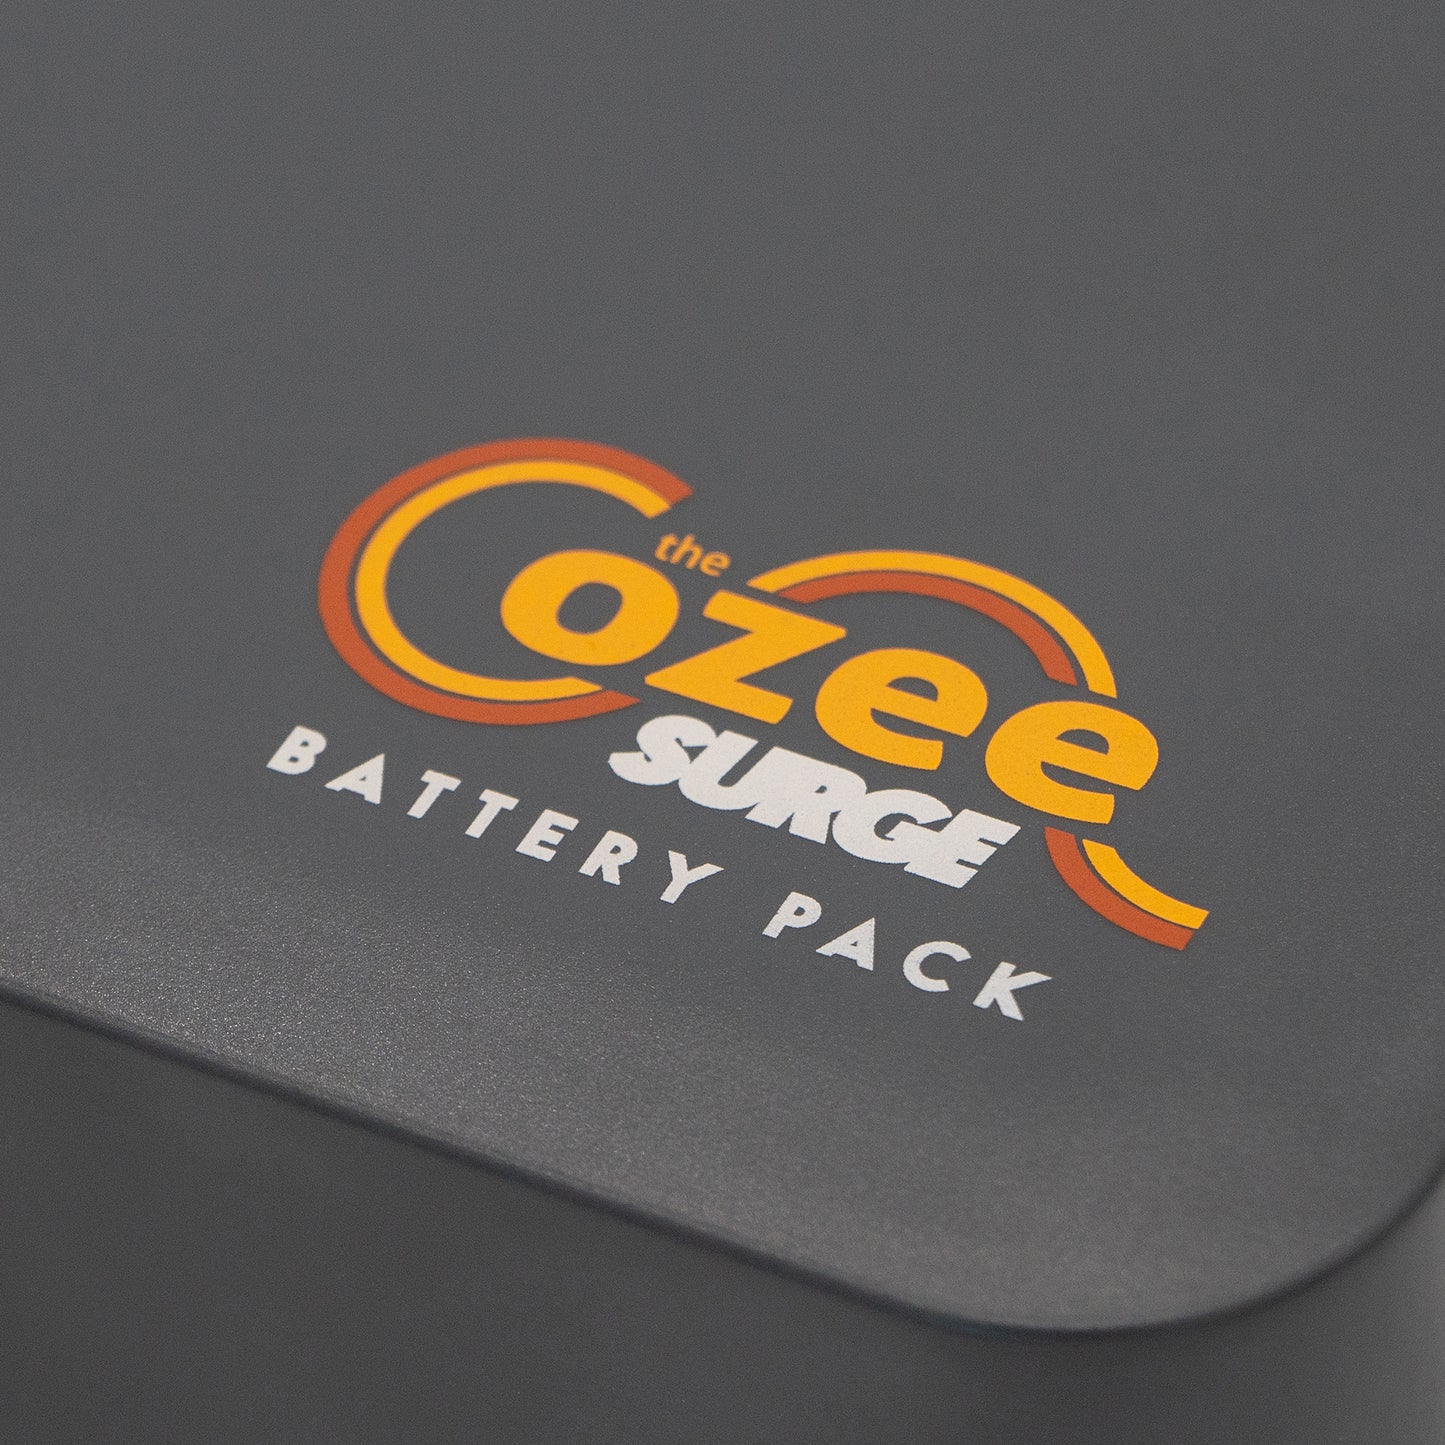 The Cozee Battery Powered Heating Blanket™